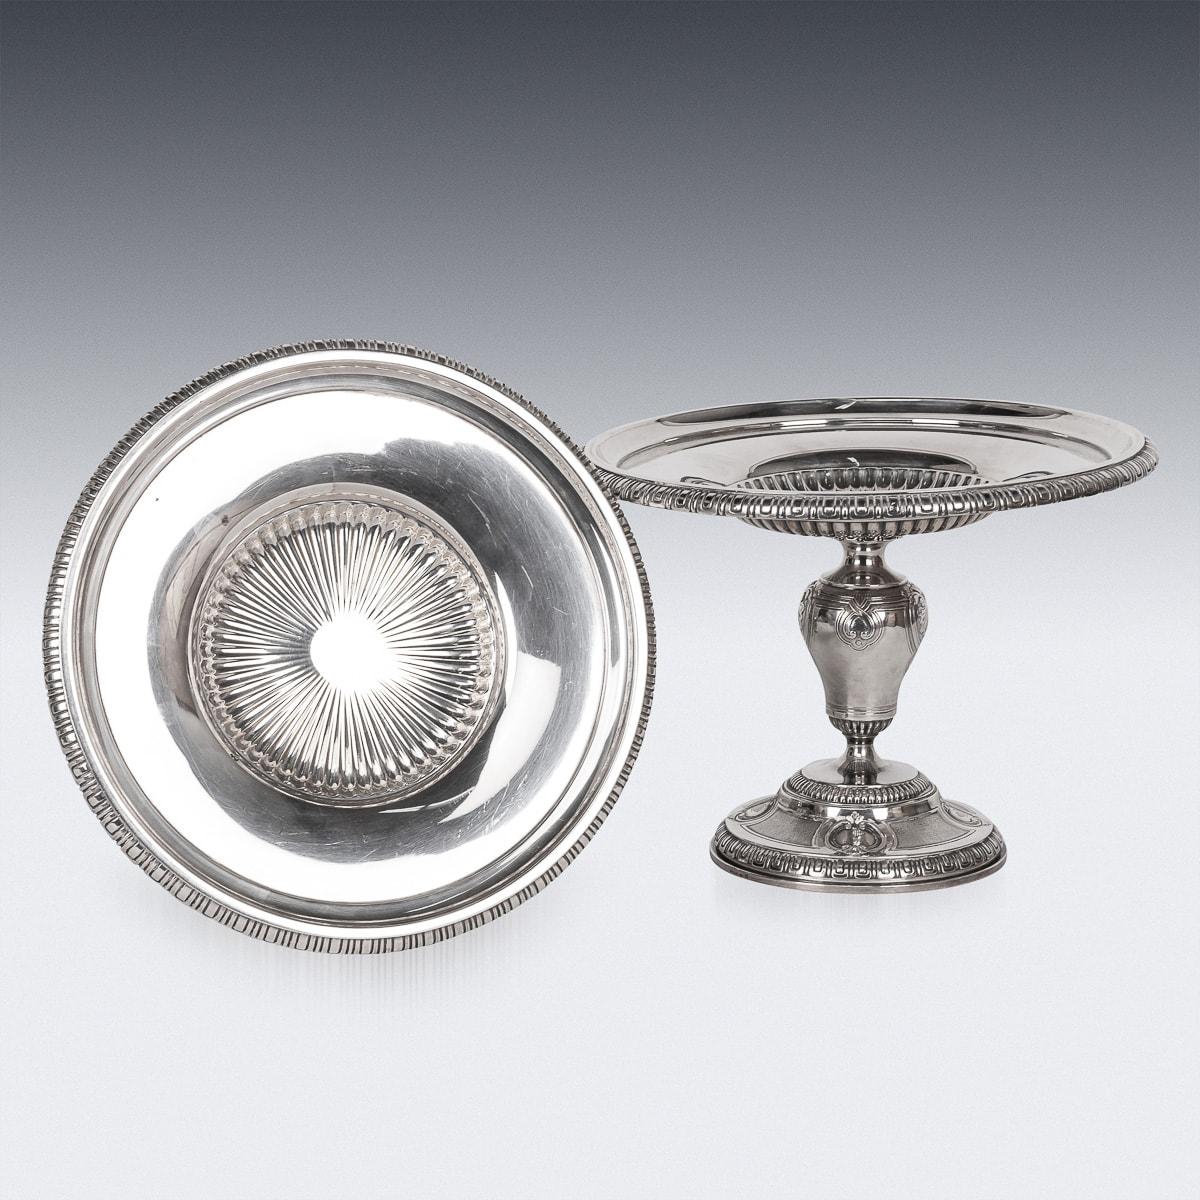 Antique late-19th Century French exquisite solid silver pair of comports. Standing on a domed foot adorned with scrolls, shells and fluted boarders, the inverted pear shaped foot supporting a dish. A truly superb and fine pair, made by undoubtedly